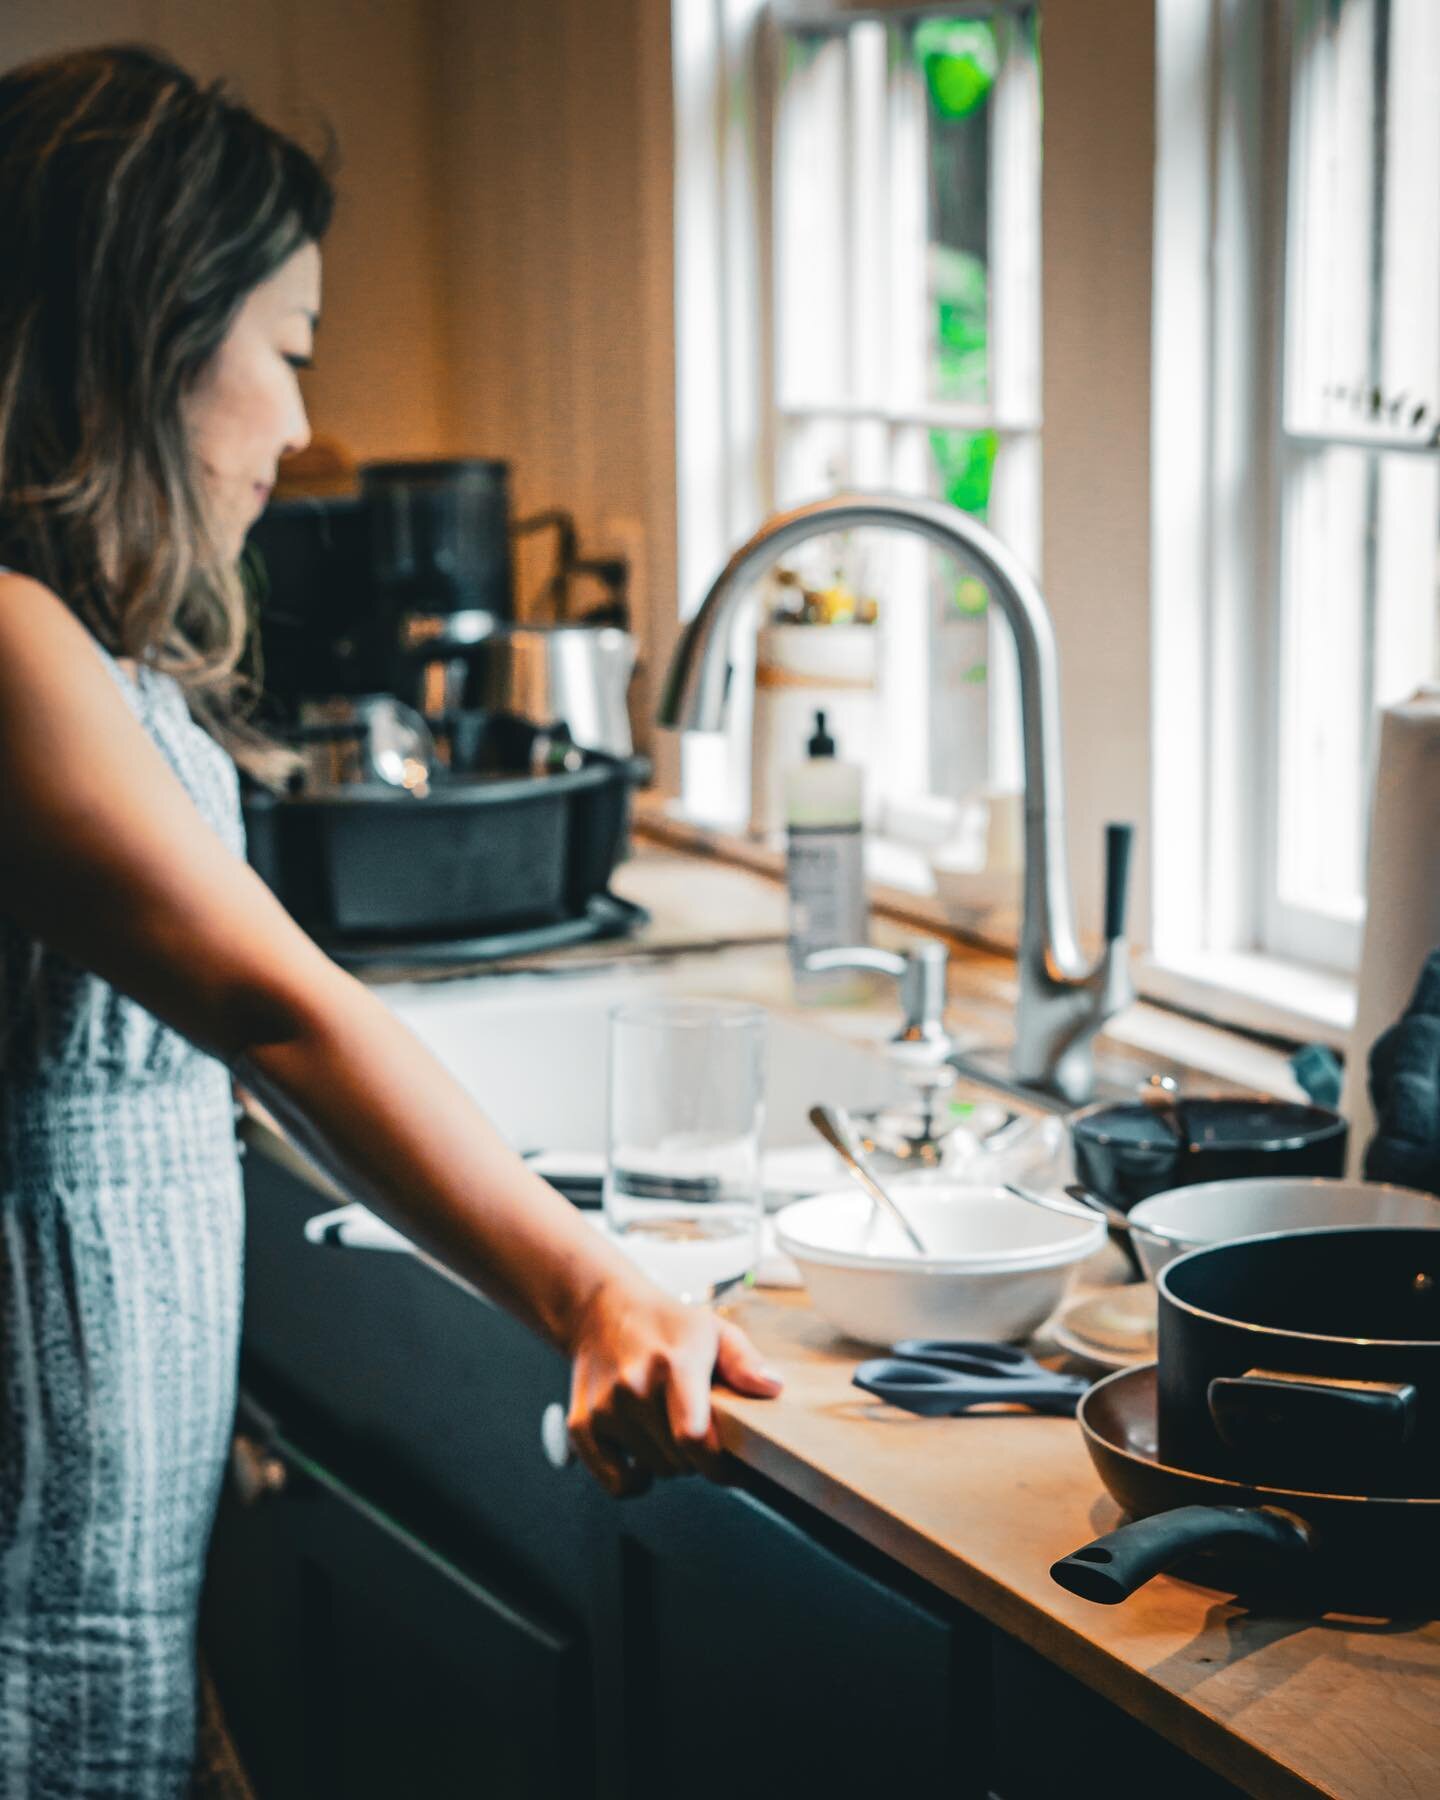 Pile of dirty dishes? Tired of having a messy home?

Want to know 5 quick actions you can take to reset your home in 30 minutes or less?

👇👇👇
Link in my bio to read more!

Photo taken by @shotby.monikaaudi.nyc

#motherhood #momlife #stayathomemom 